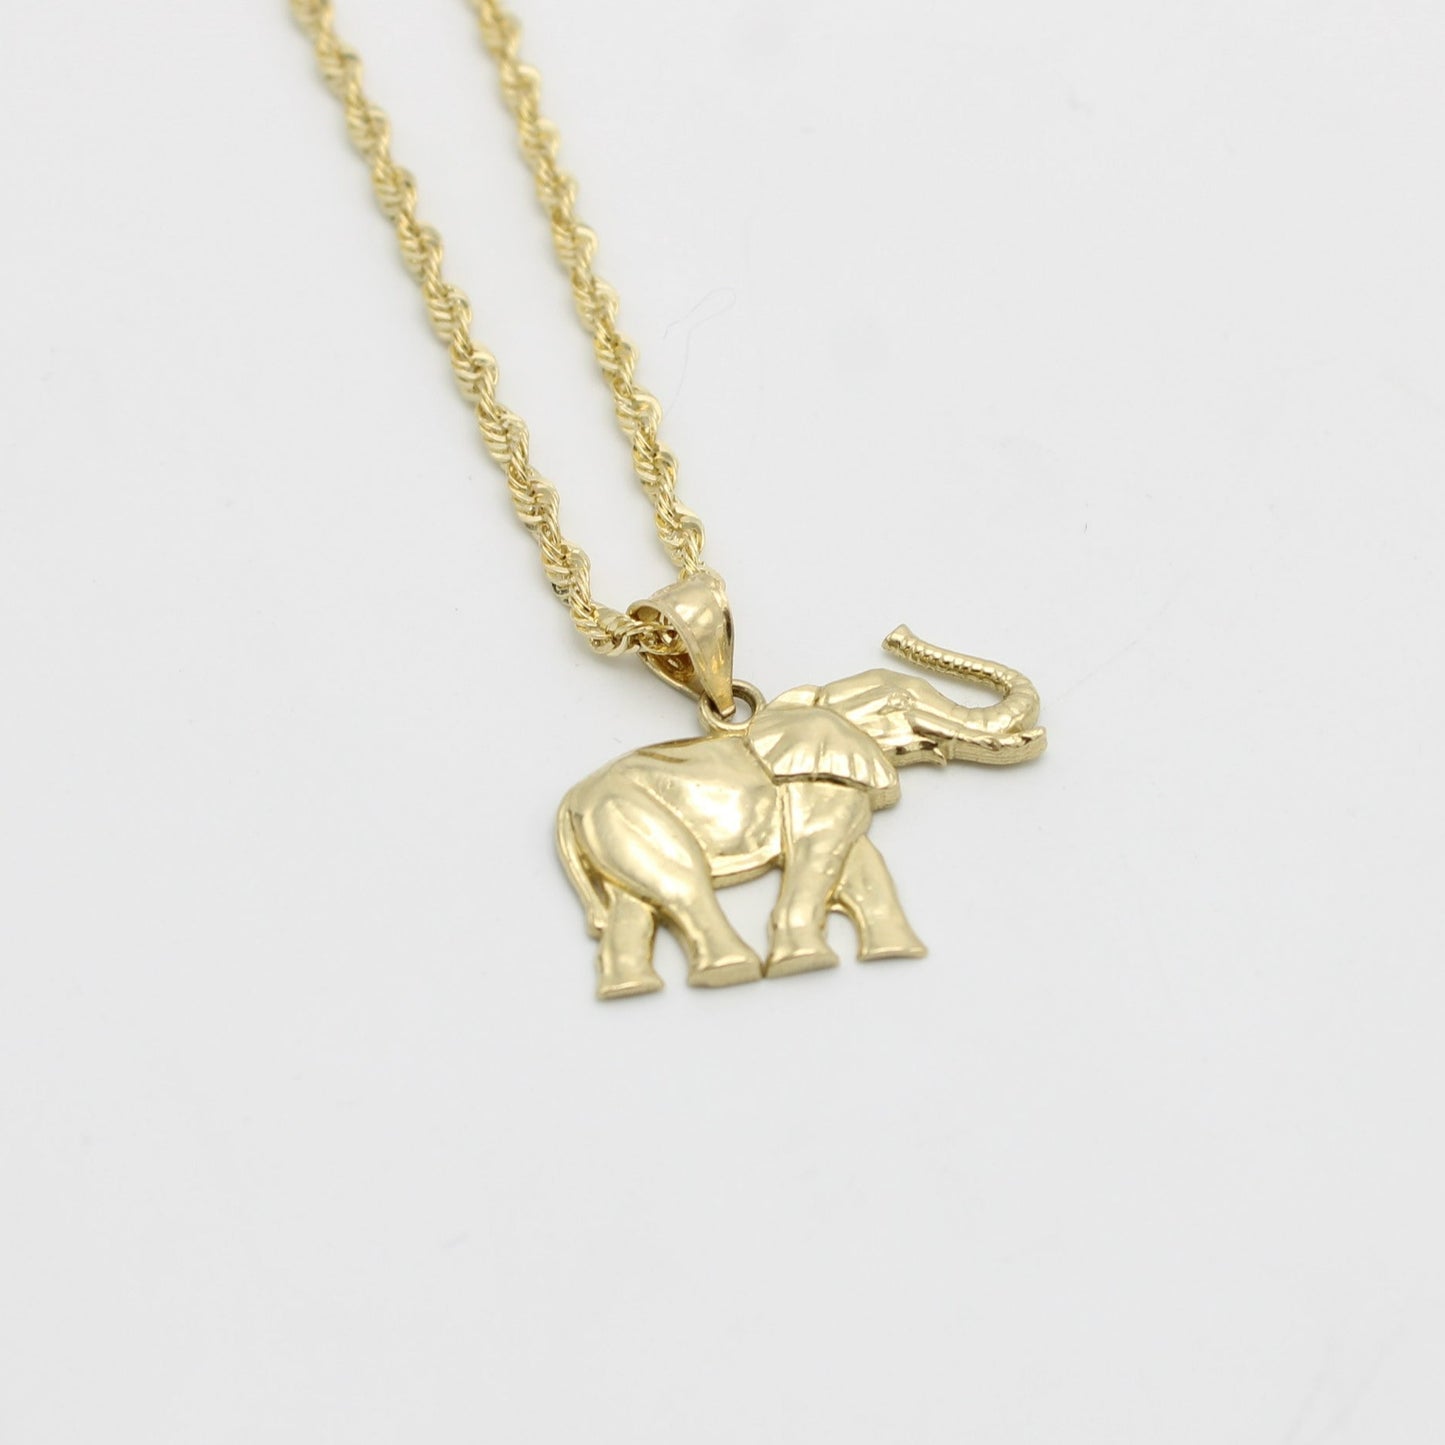 14K Elephan Pendant Cz Stones With Rope Chain Yellow Gold